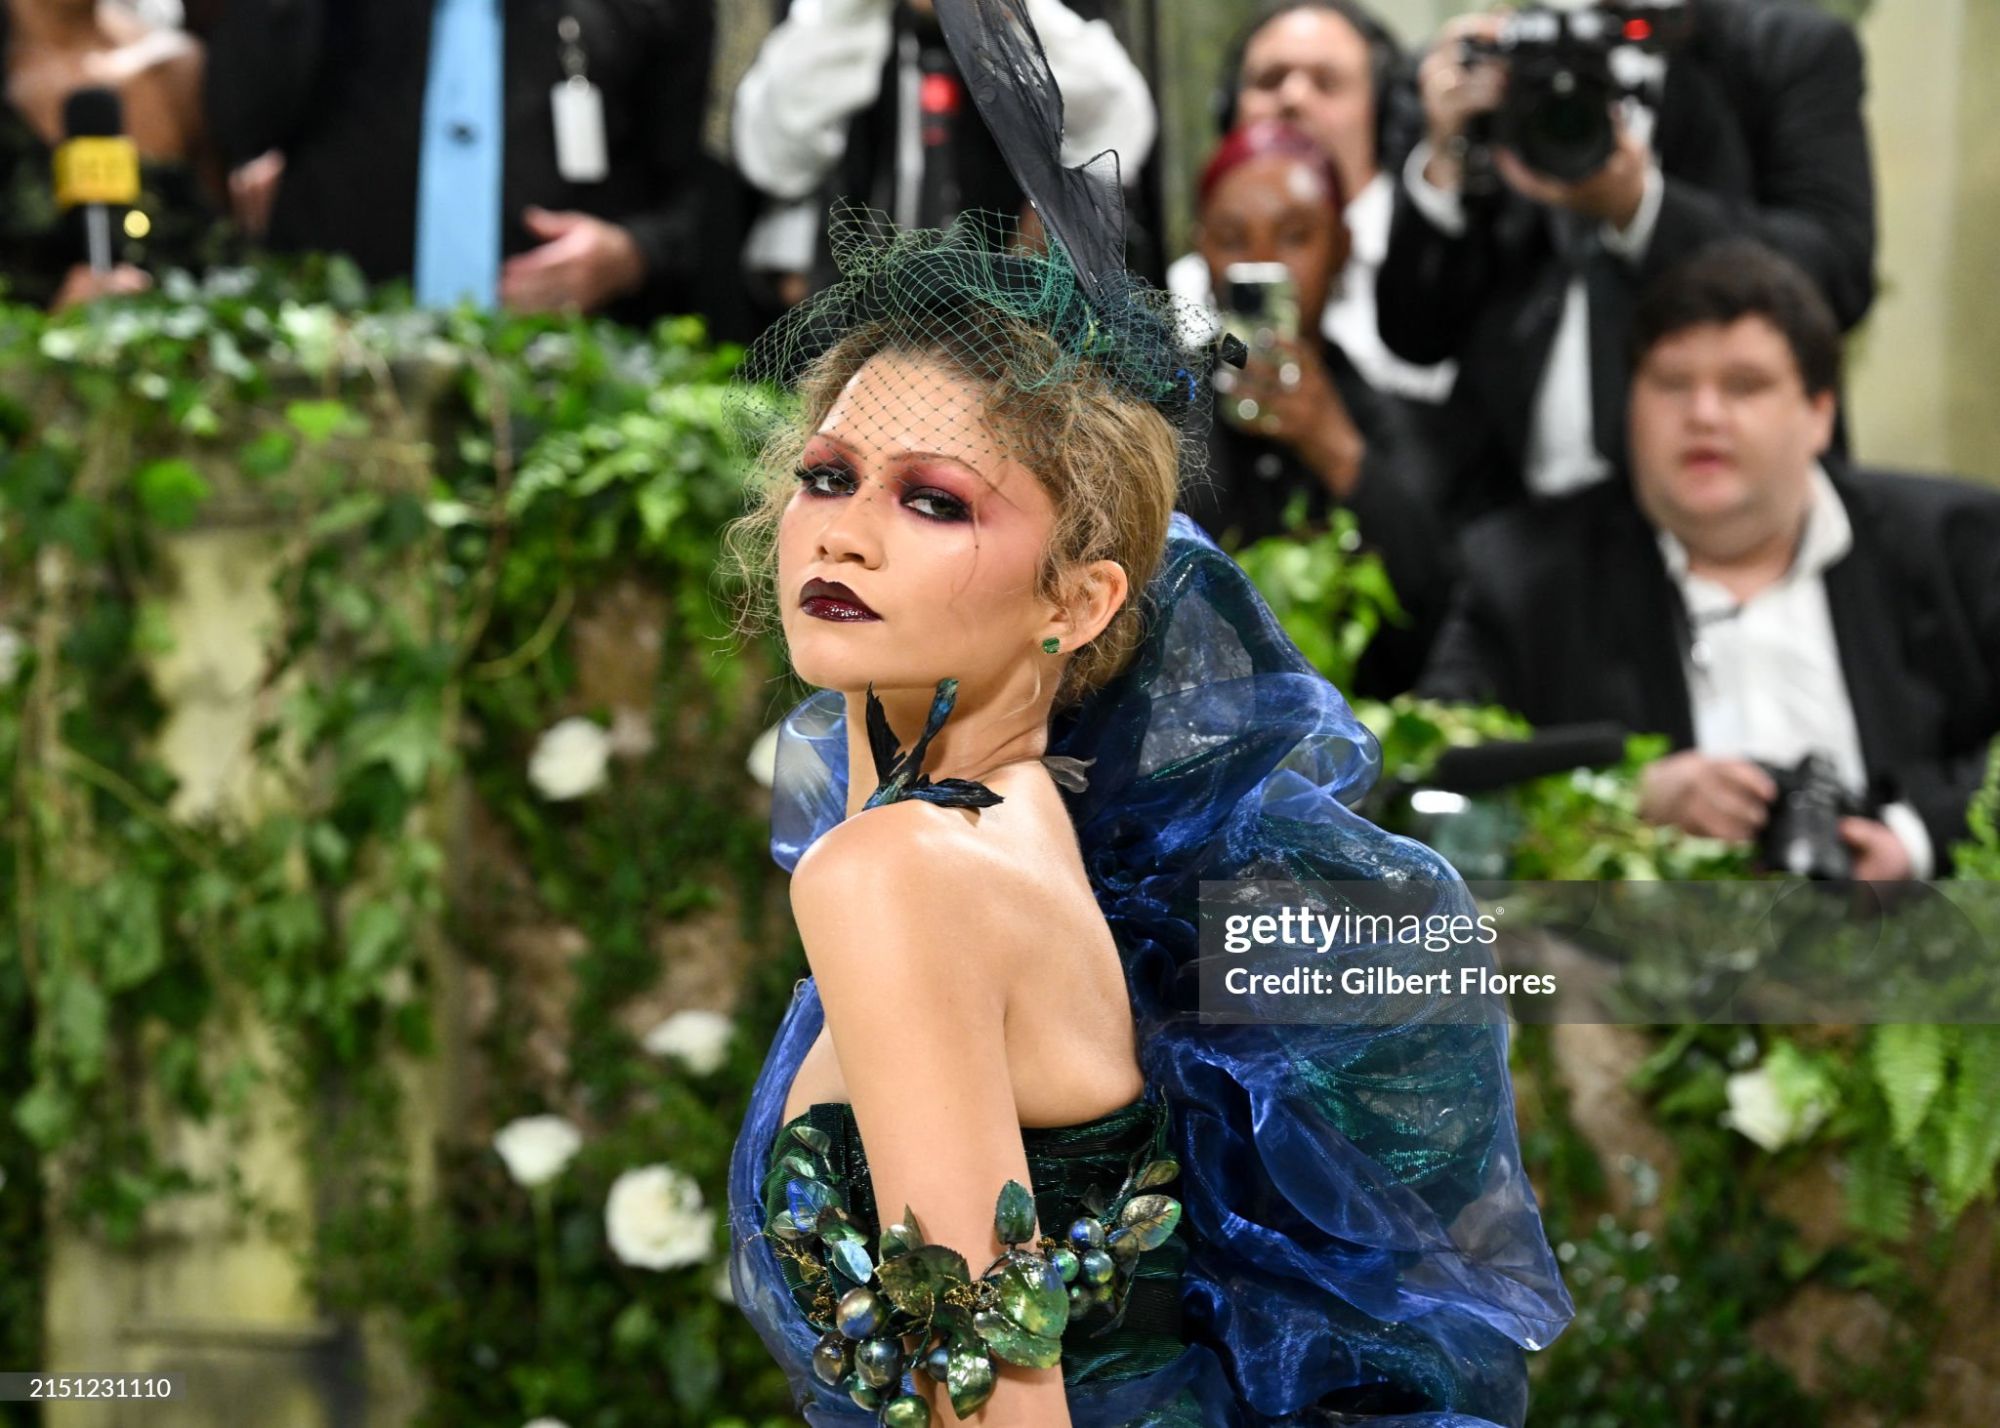 gettyimages-2151231110-2048x2048.jpg